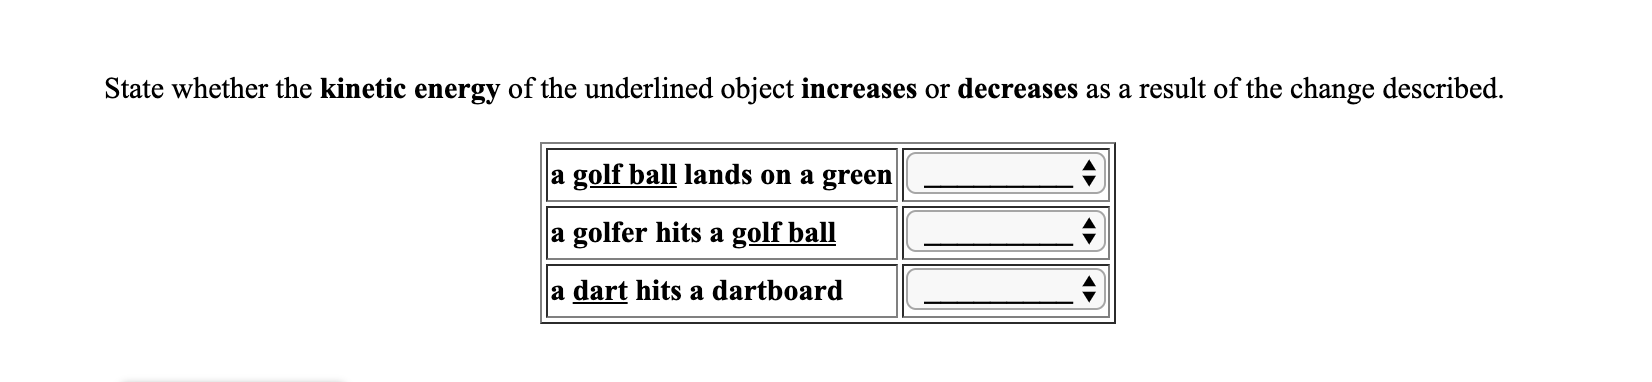 State whether the kinetic energy of the underlined object increases or decreases as a result of the change described.
a golf ball lands on a green
a golfer hits a golf ball
a dart hits a dartboard
